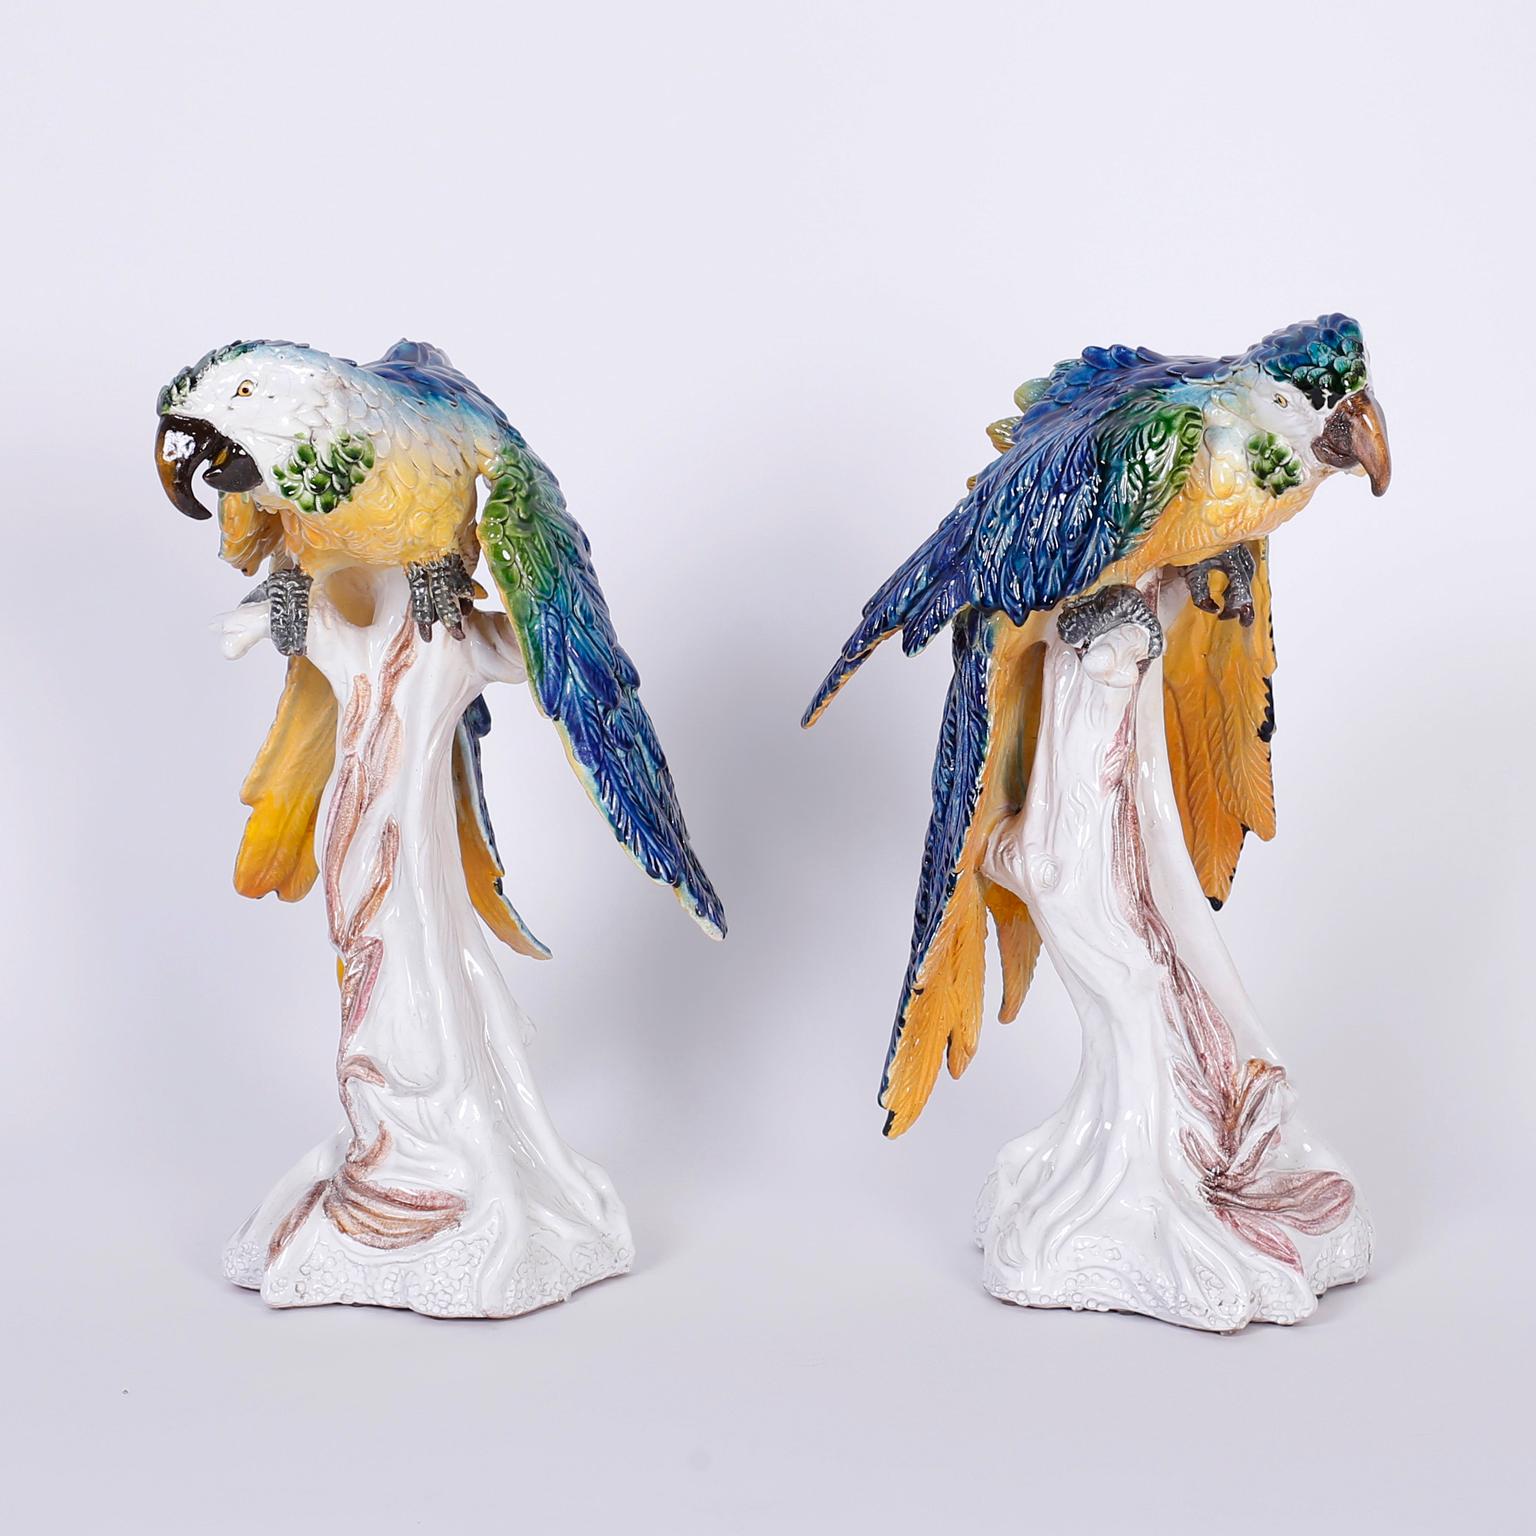 Pair of Italian glazed terra cotta parrots or birds composed with animated expressions, decorated with lush tropical colors, and perched on tree trunks. Signed made in Italy on the bottoms.